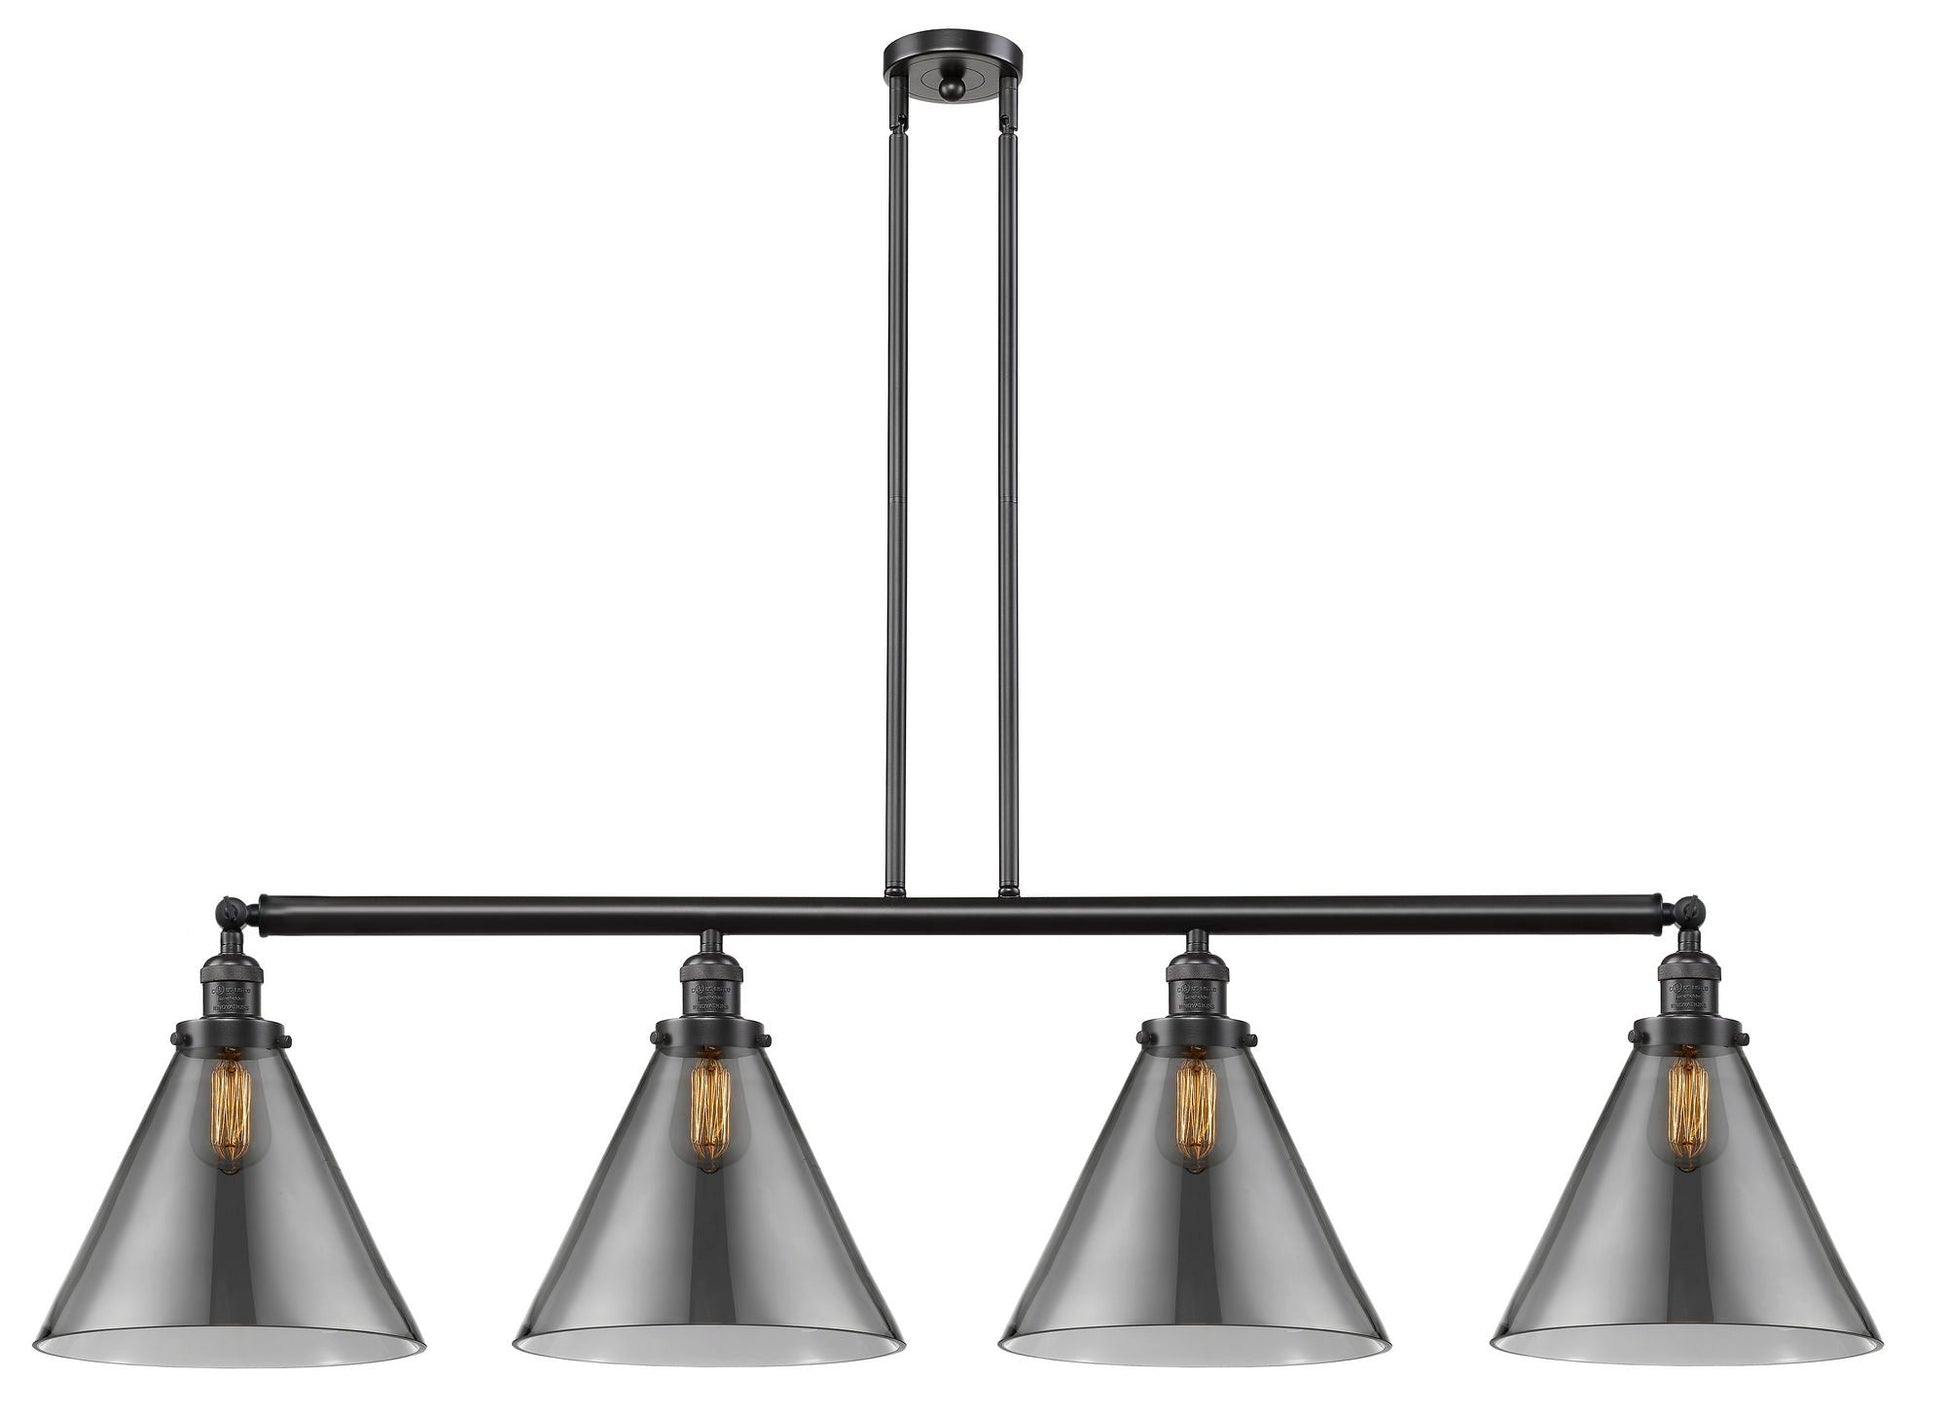 214-OB-G43-L 4-Light 56" Oil Rubbed Bronze Island Light - Plated Smoke Cone 12" Glass - LED Bulb - Dimmensions: 56 x 12 x 14<br>Minimum Height : 24.25<br>Maximum Height : 48.25 - Sloped Ceiling Compatible: Yes